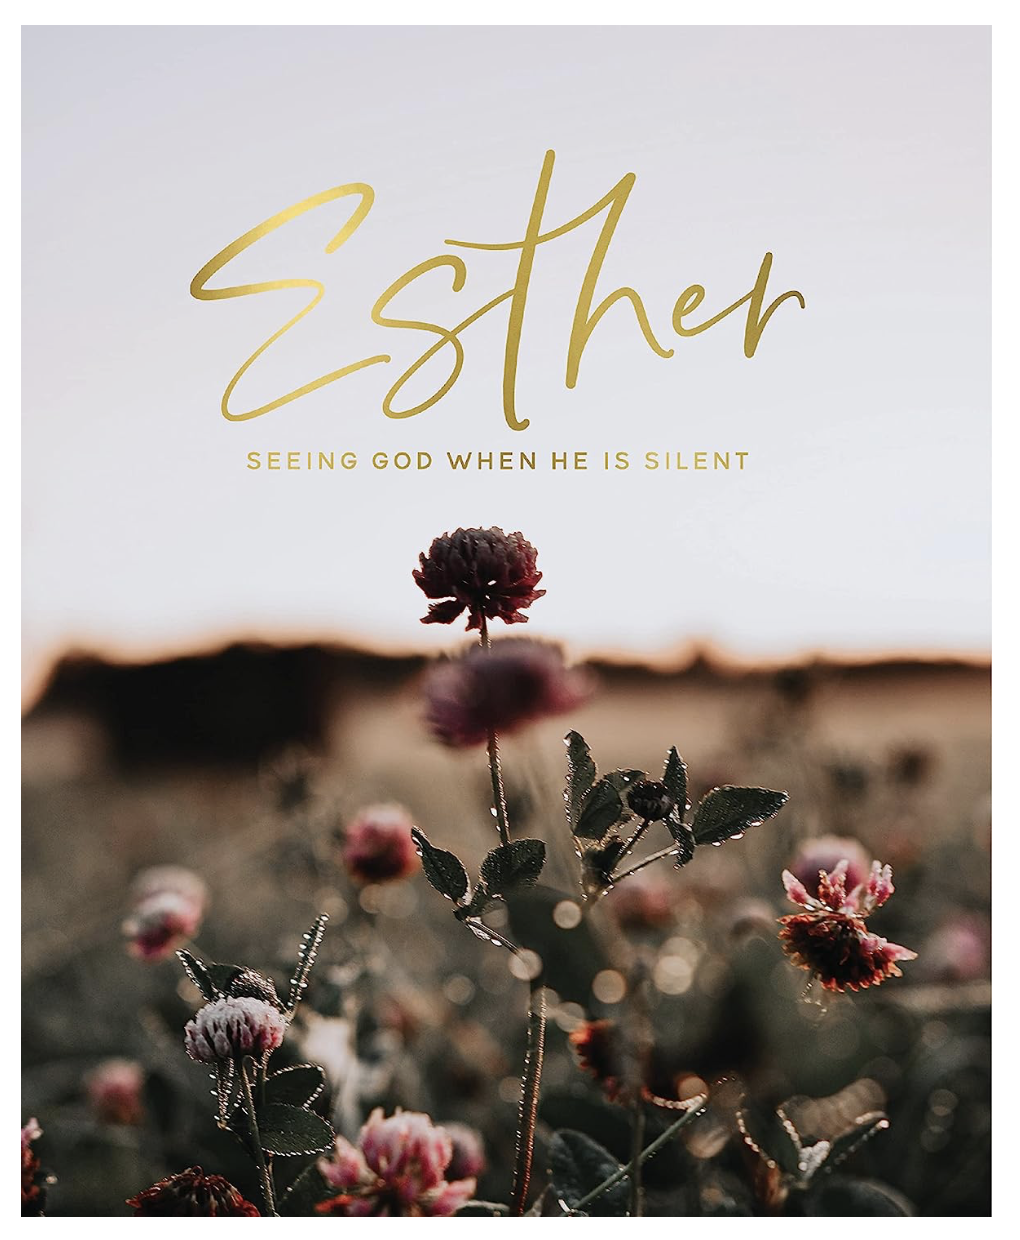 Esther study guide